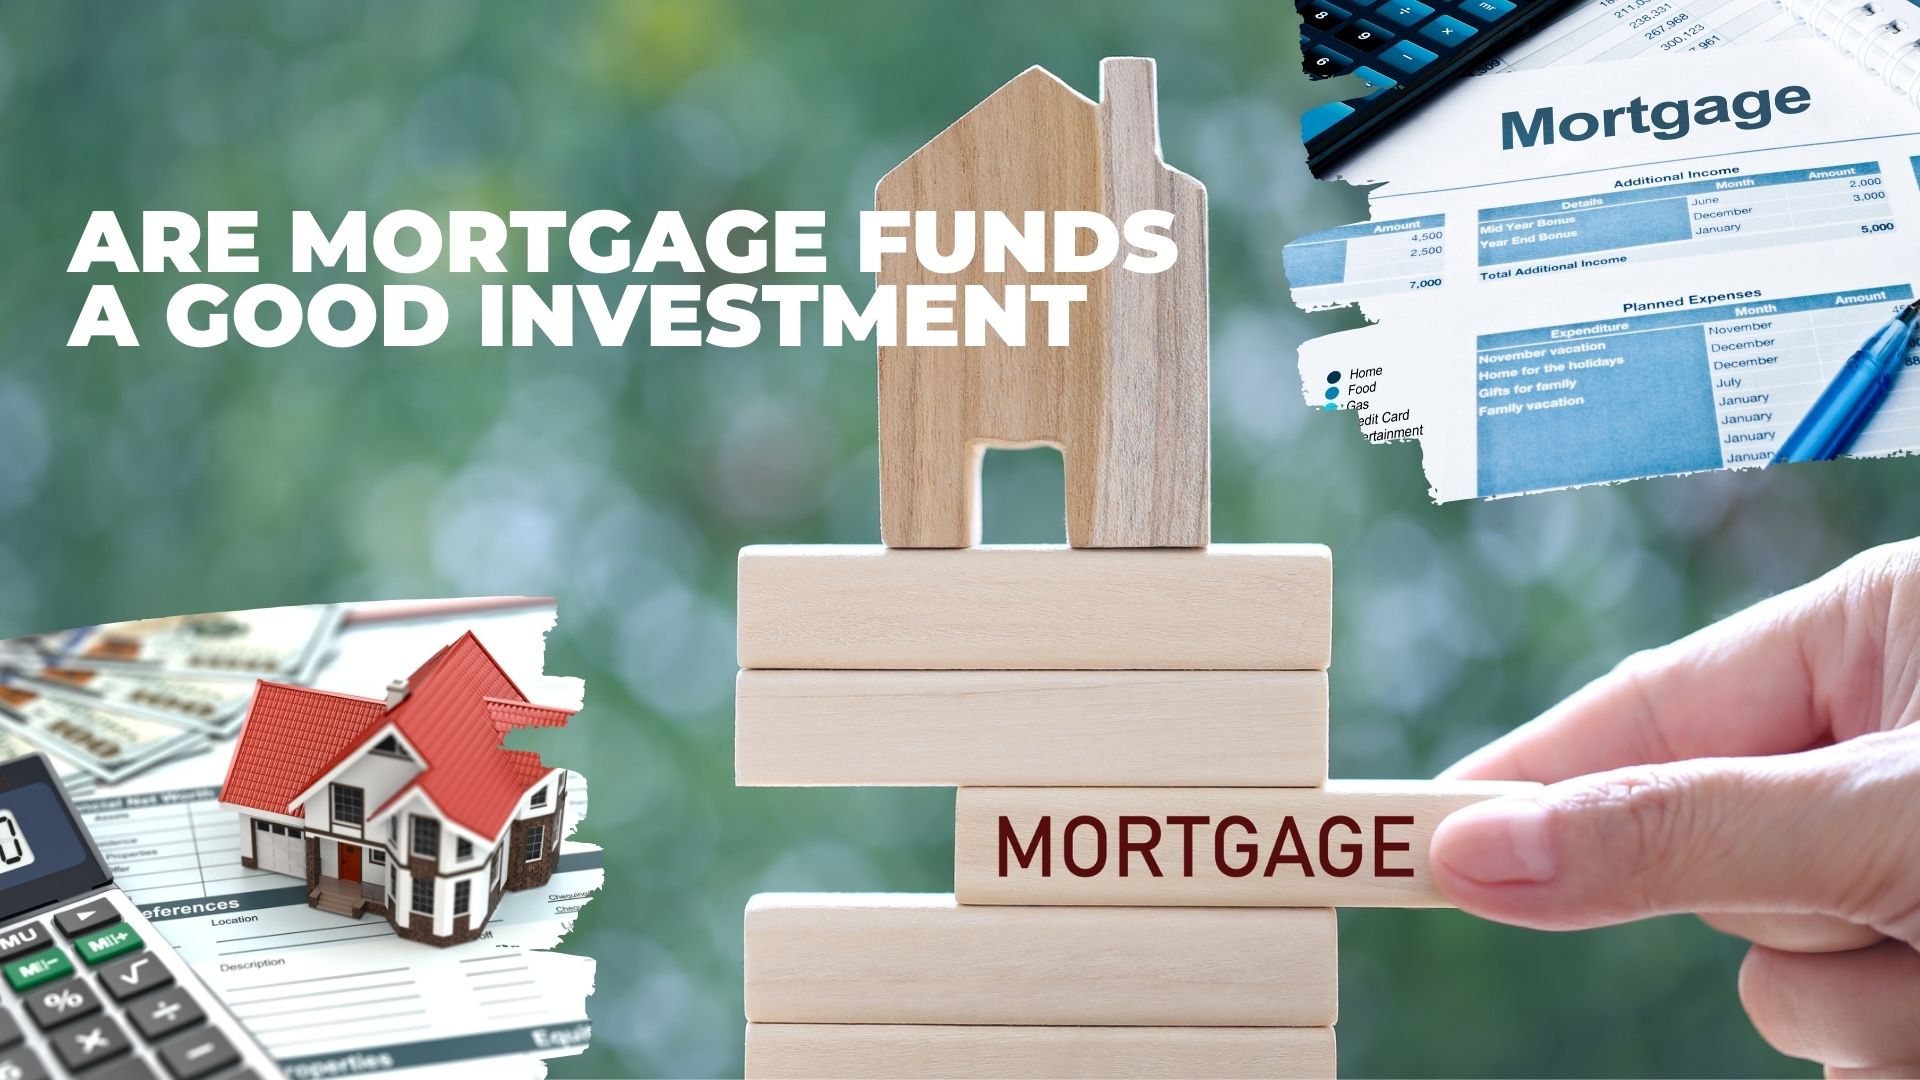 Are Mortgage Funds a Good Investment